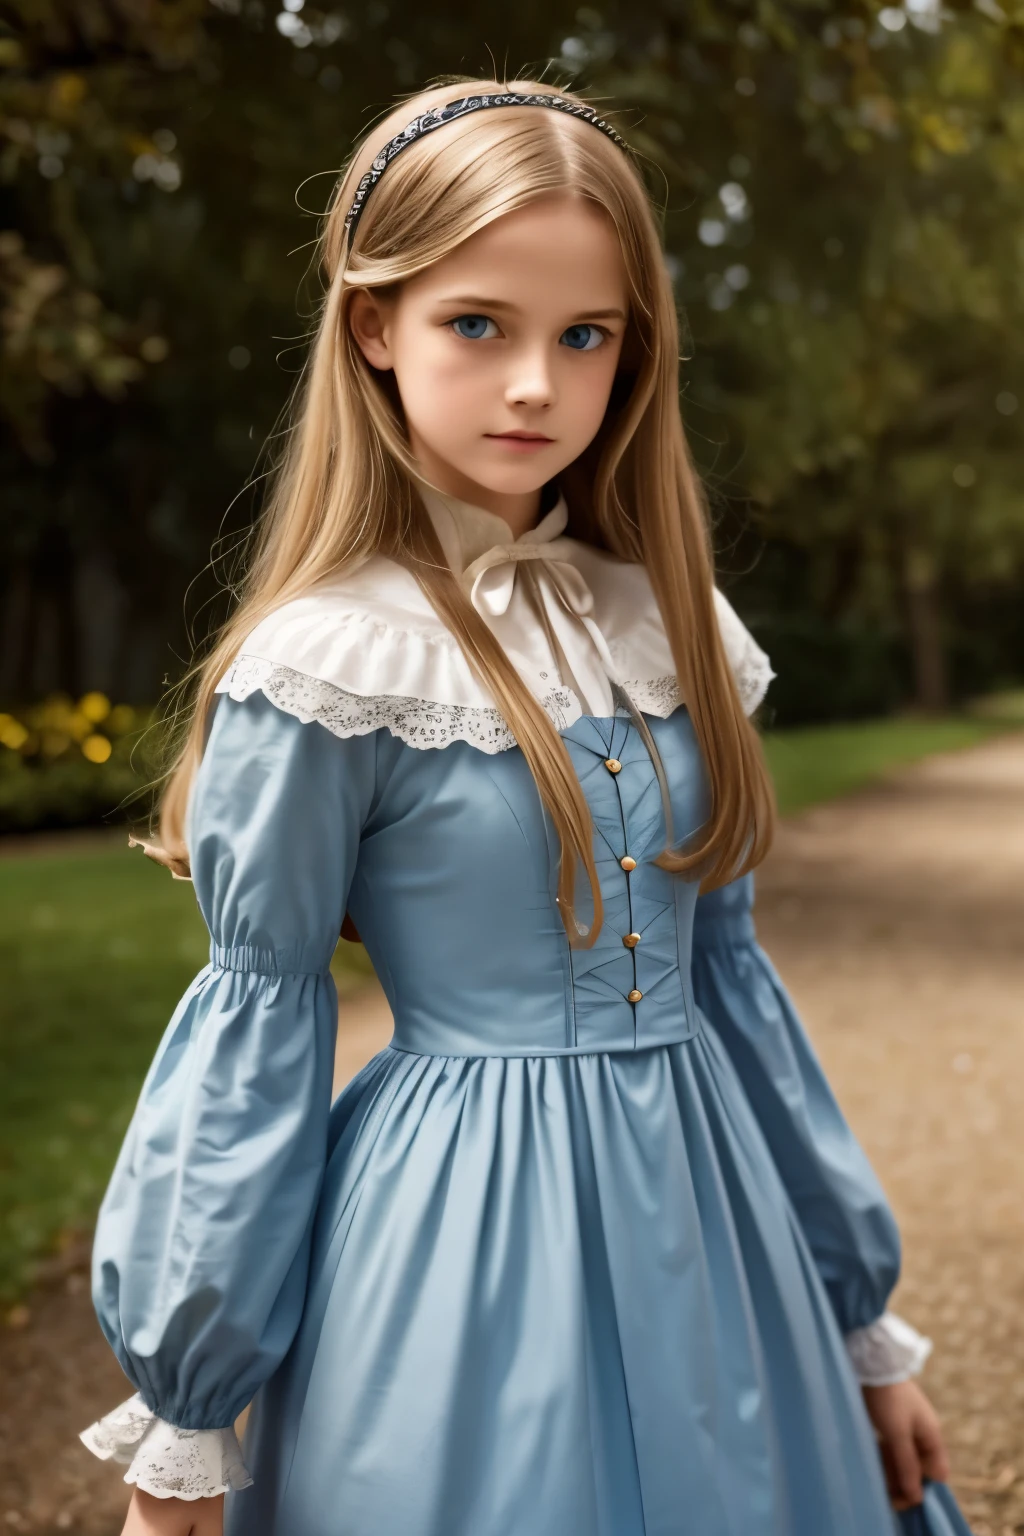 Virginia Otis, 15 years old (blond hair, blue eyes), thin, cute face, walks at night in Canterville Castle (inspired by the novel The Canterville Ghost). aged 1887, Victorian dark fantasy

